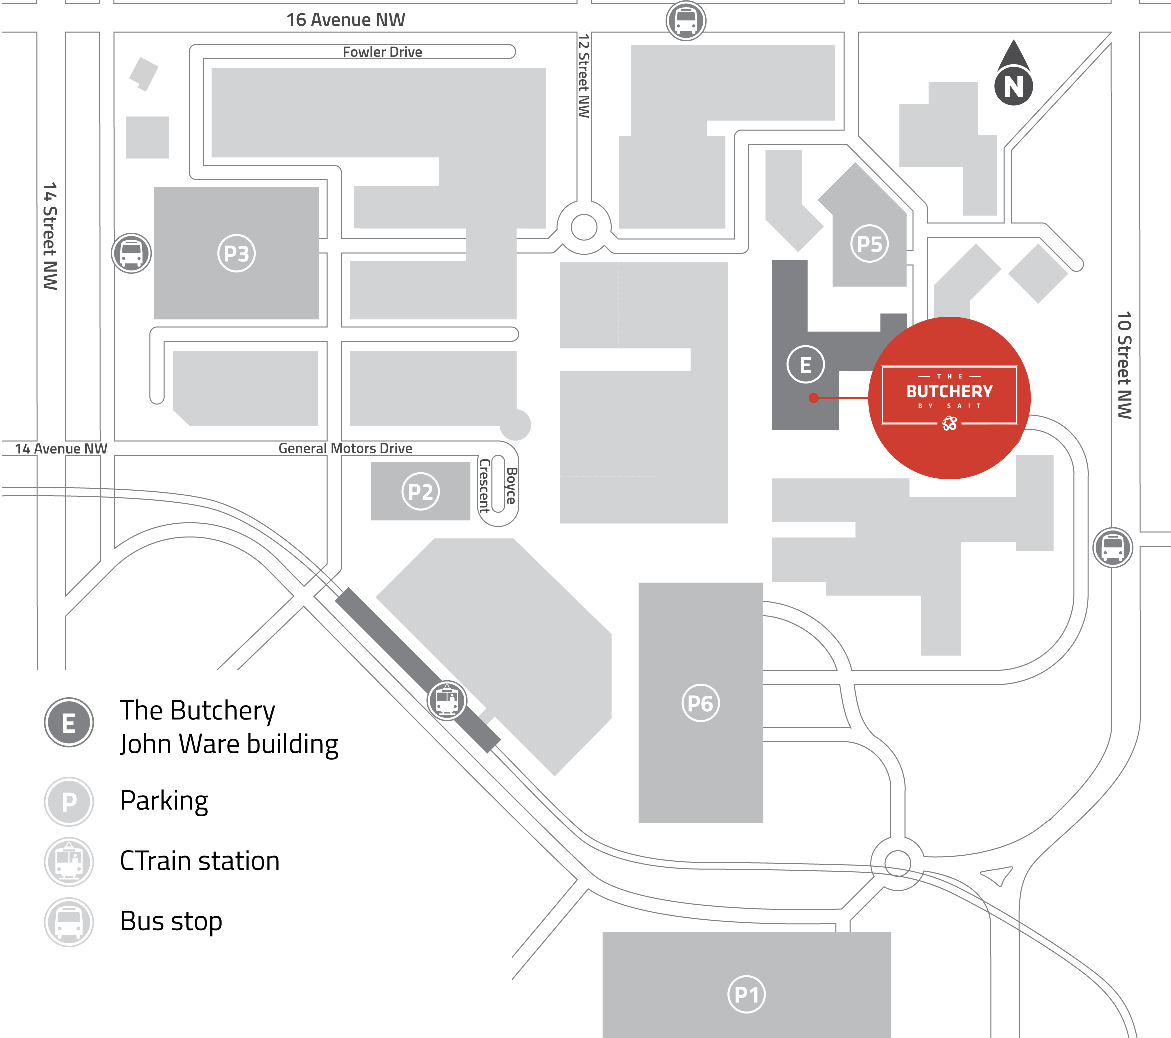 SAIT campus map with the location of The Butchery highlighted.